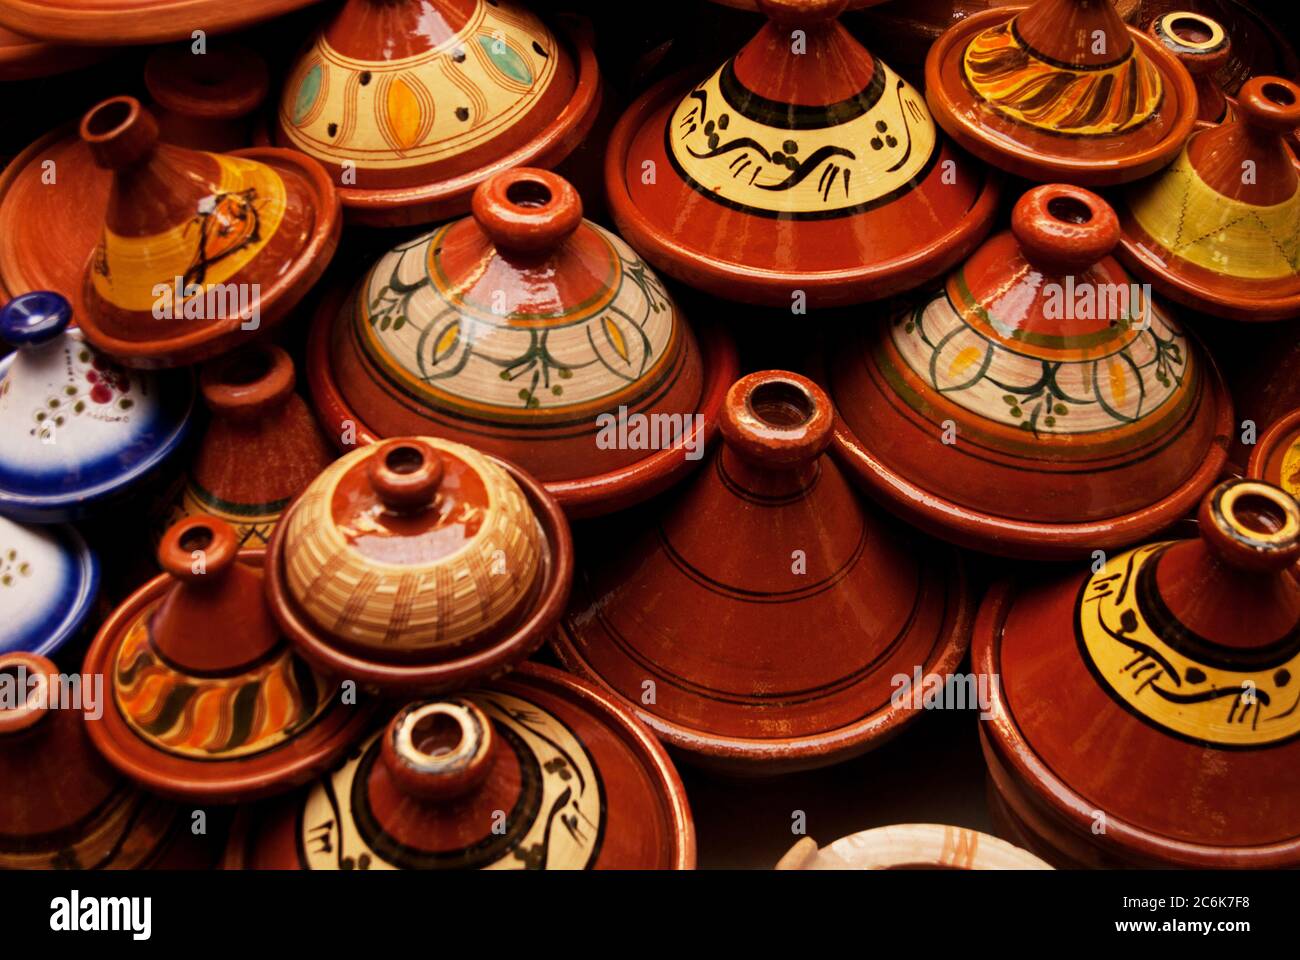 Clay tagine pots for sale at the market in Fes, Morocco Stock Photo - Alamy